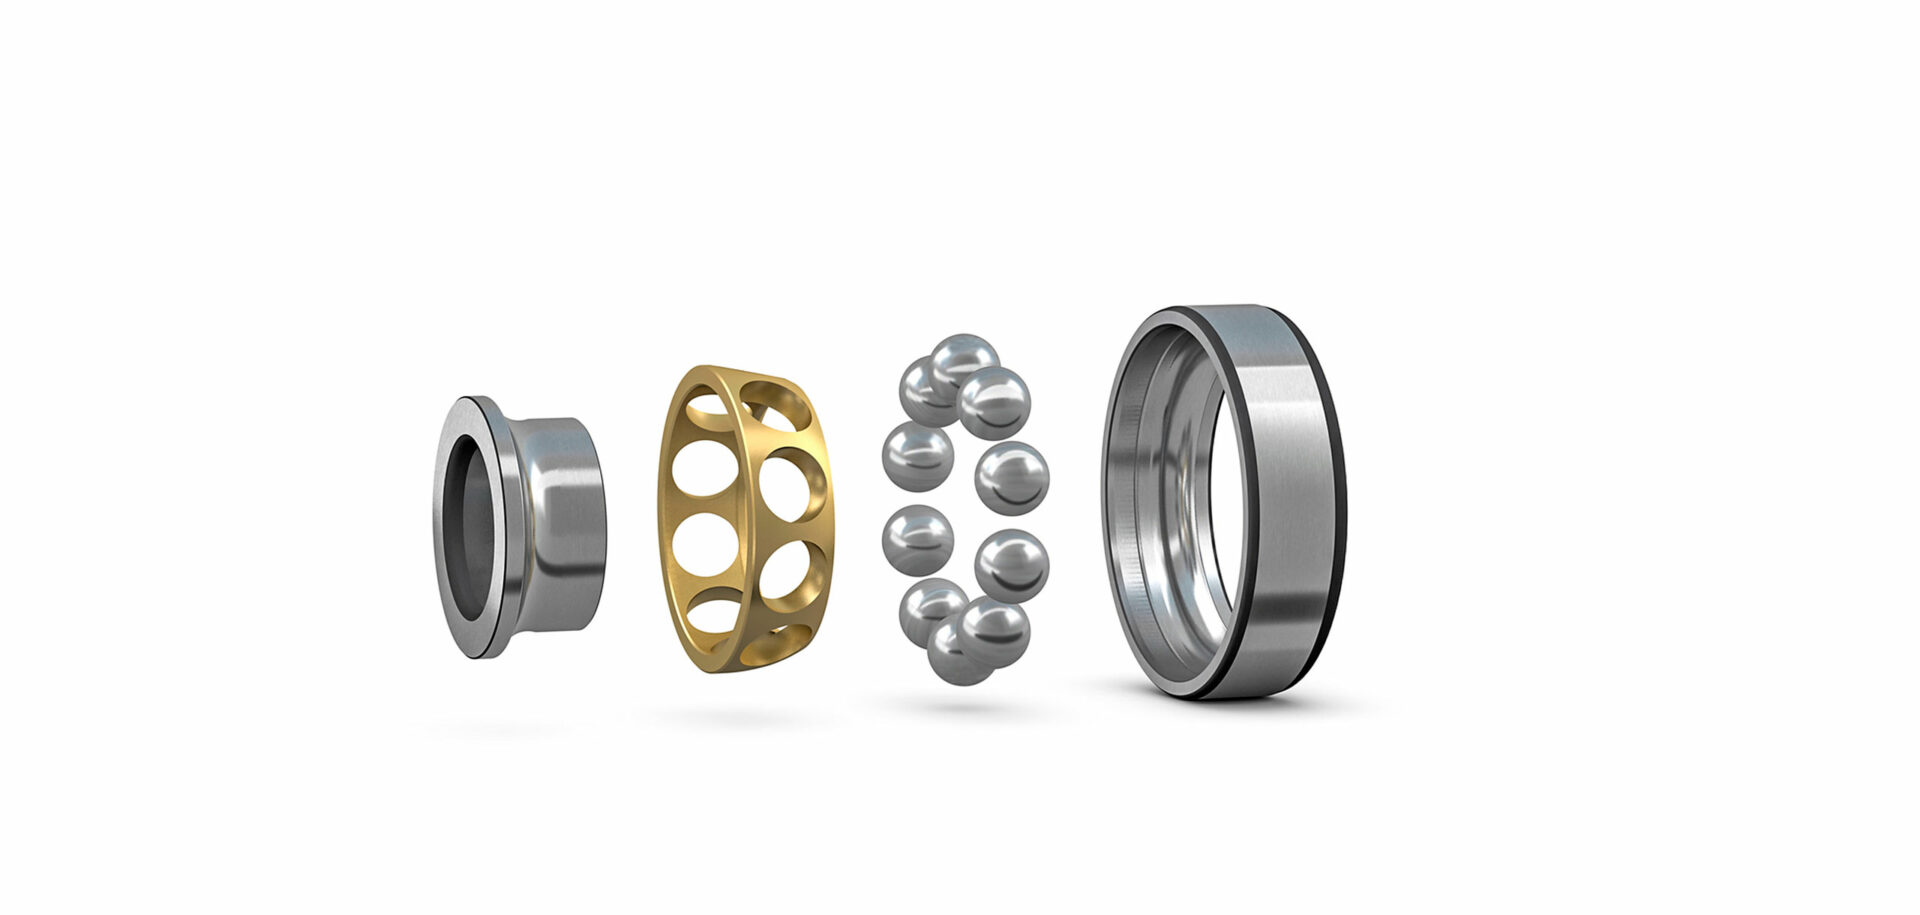 New bearings for high-speed applications